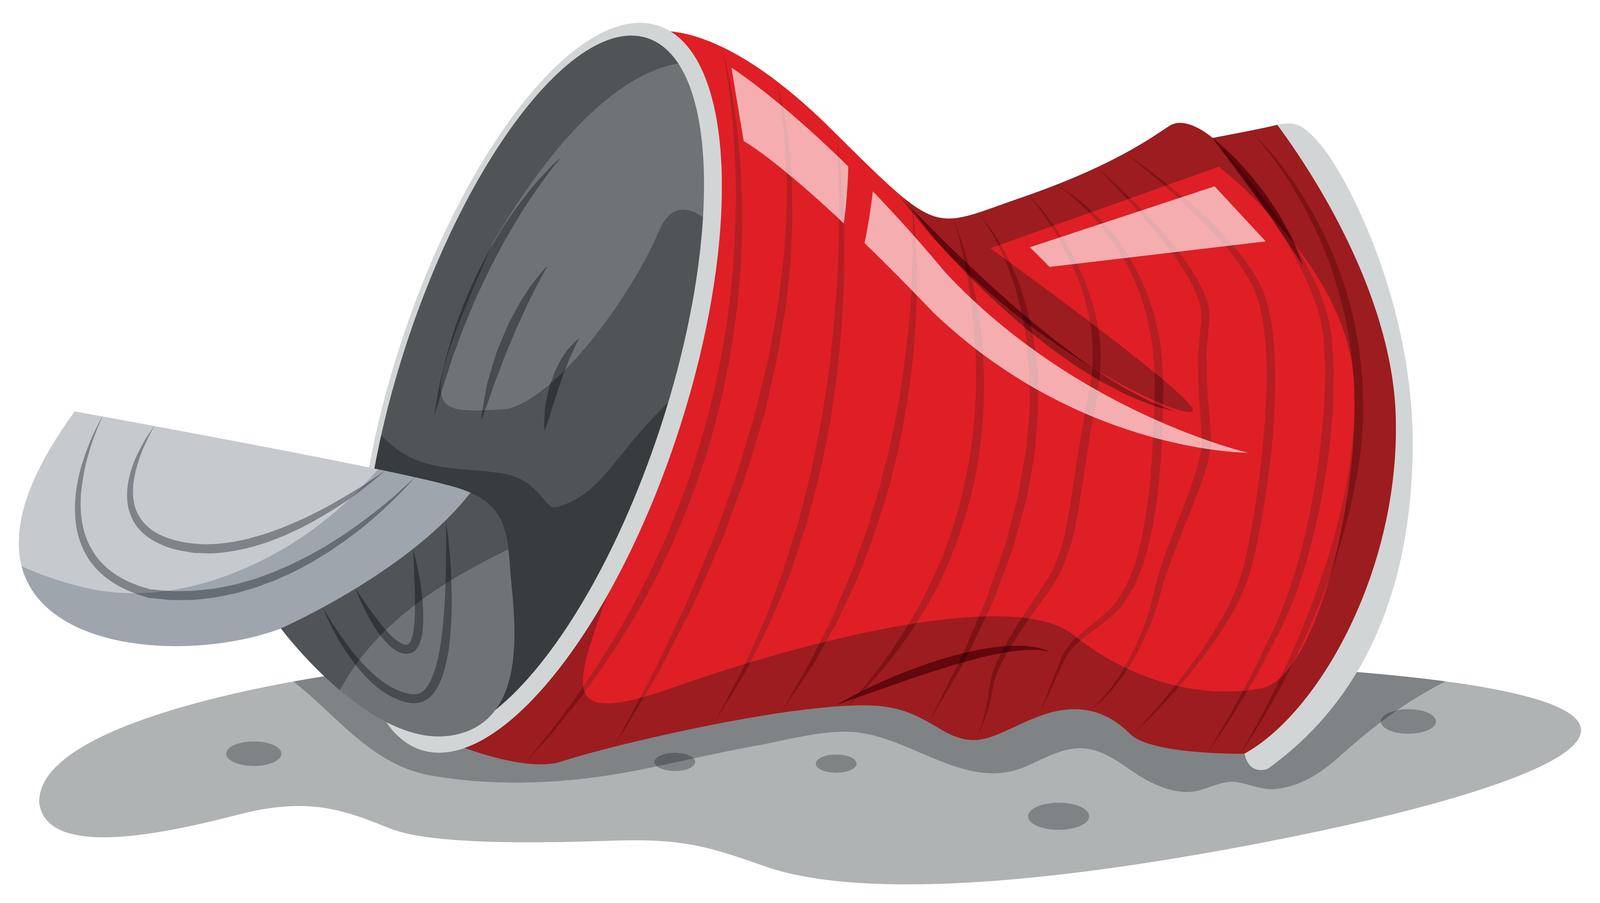 Used can on the ground illustration